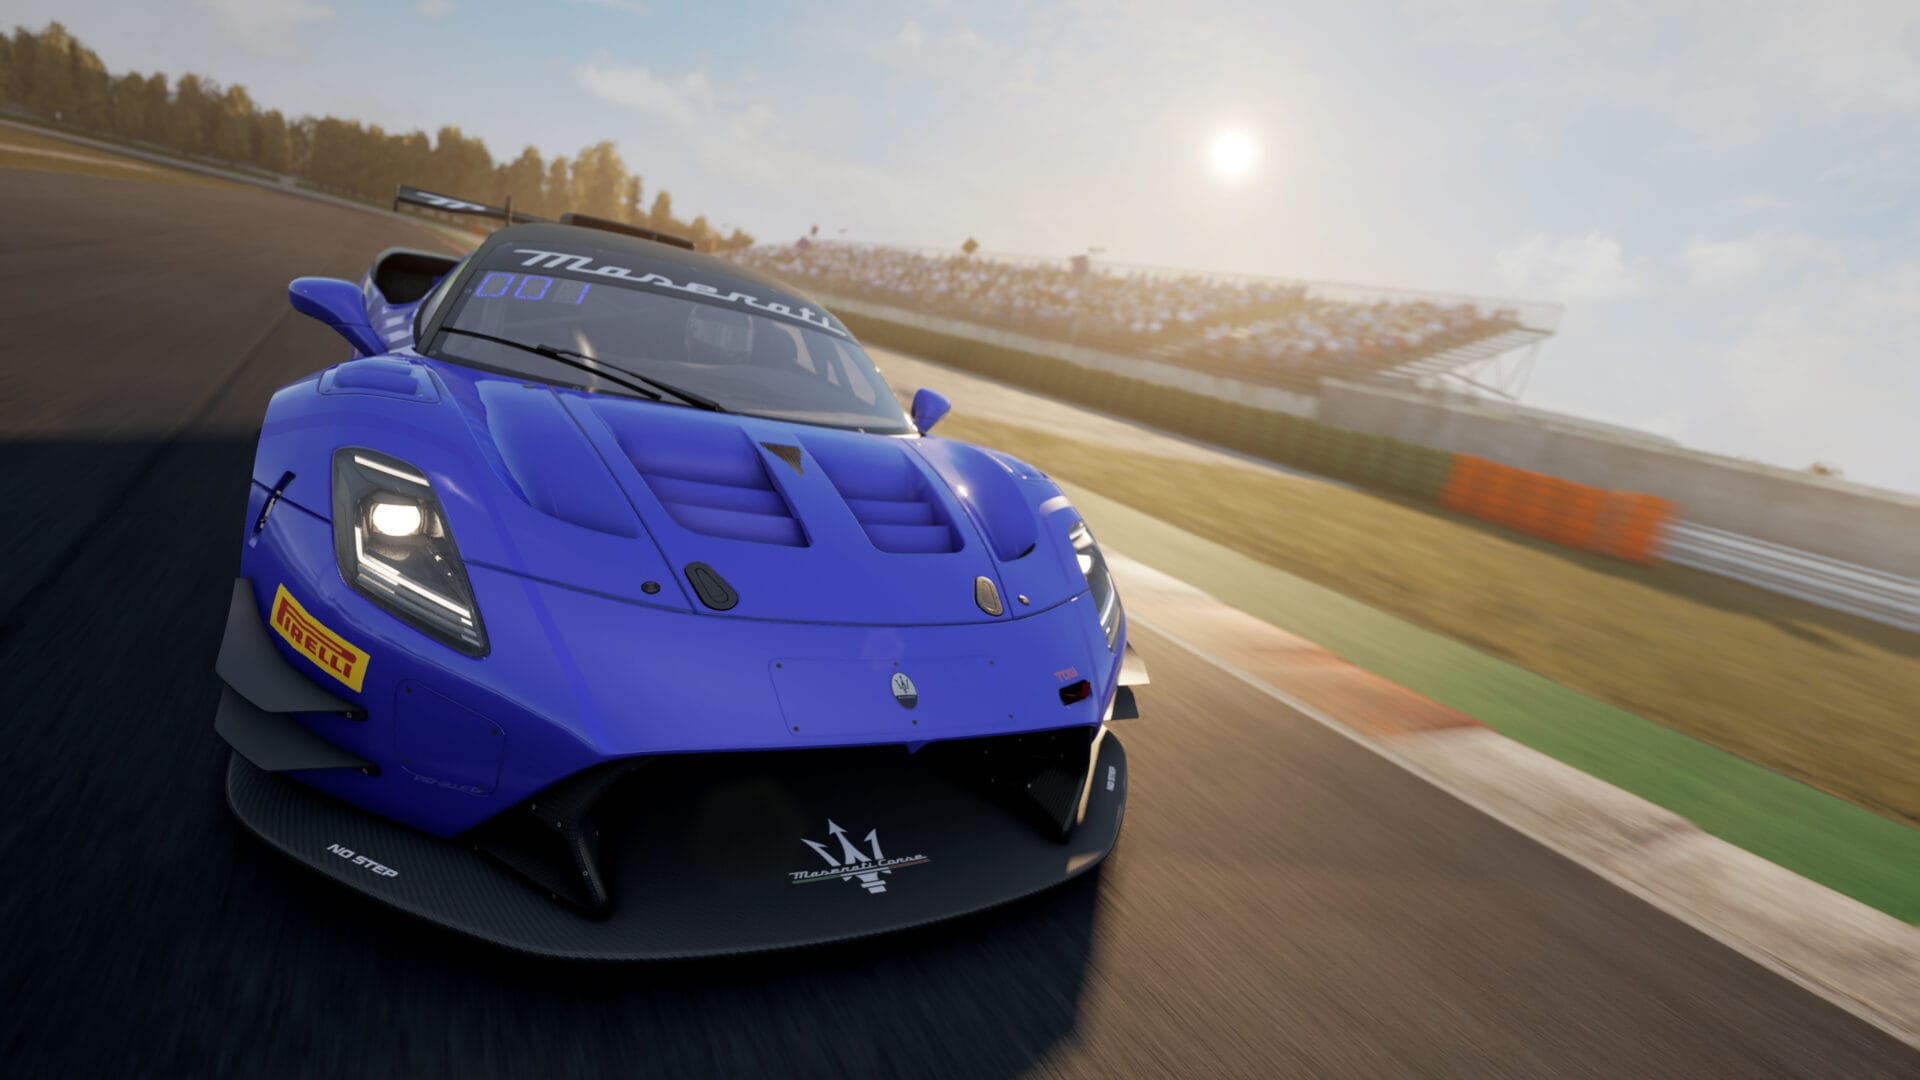 sleek elegance and powerful performance of the Blue Maserati GT2 in Assetto Corsa Competizione